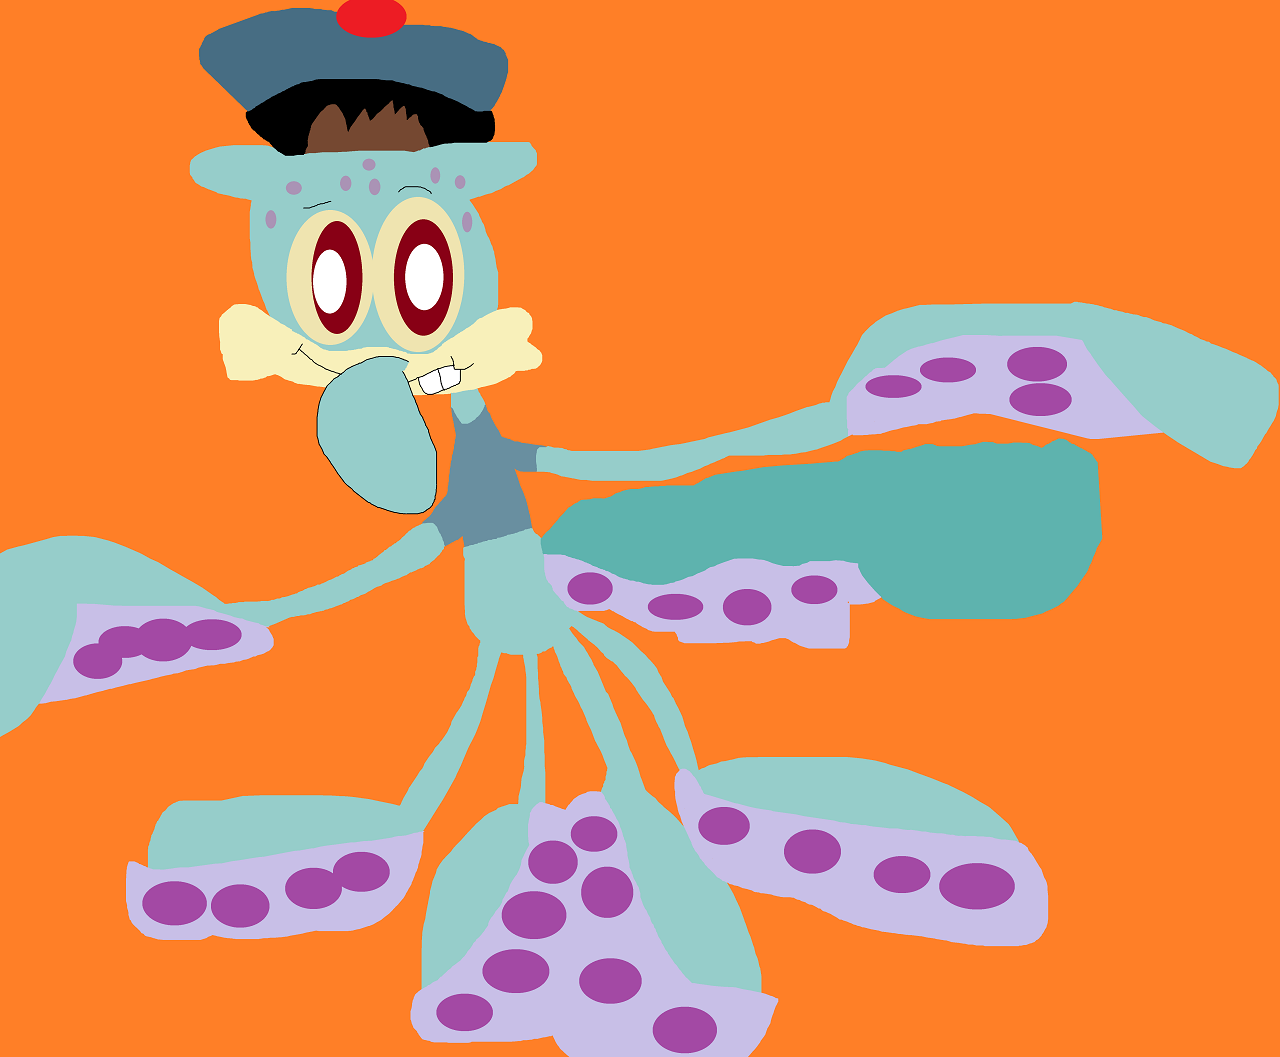 Cal The Squoctopus In Another Style by Falconlobo